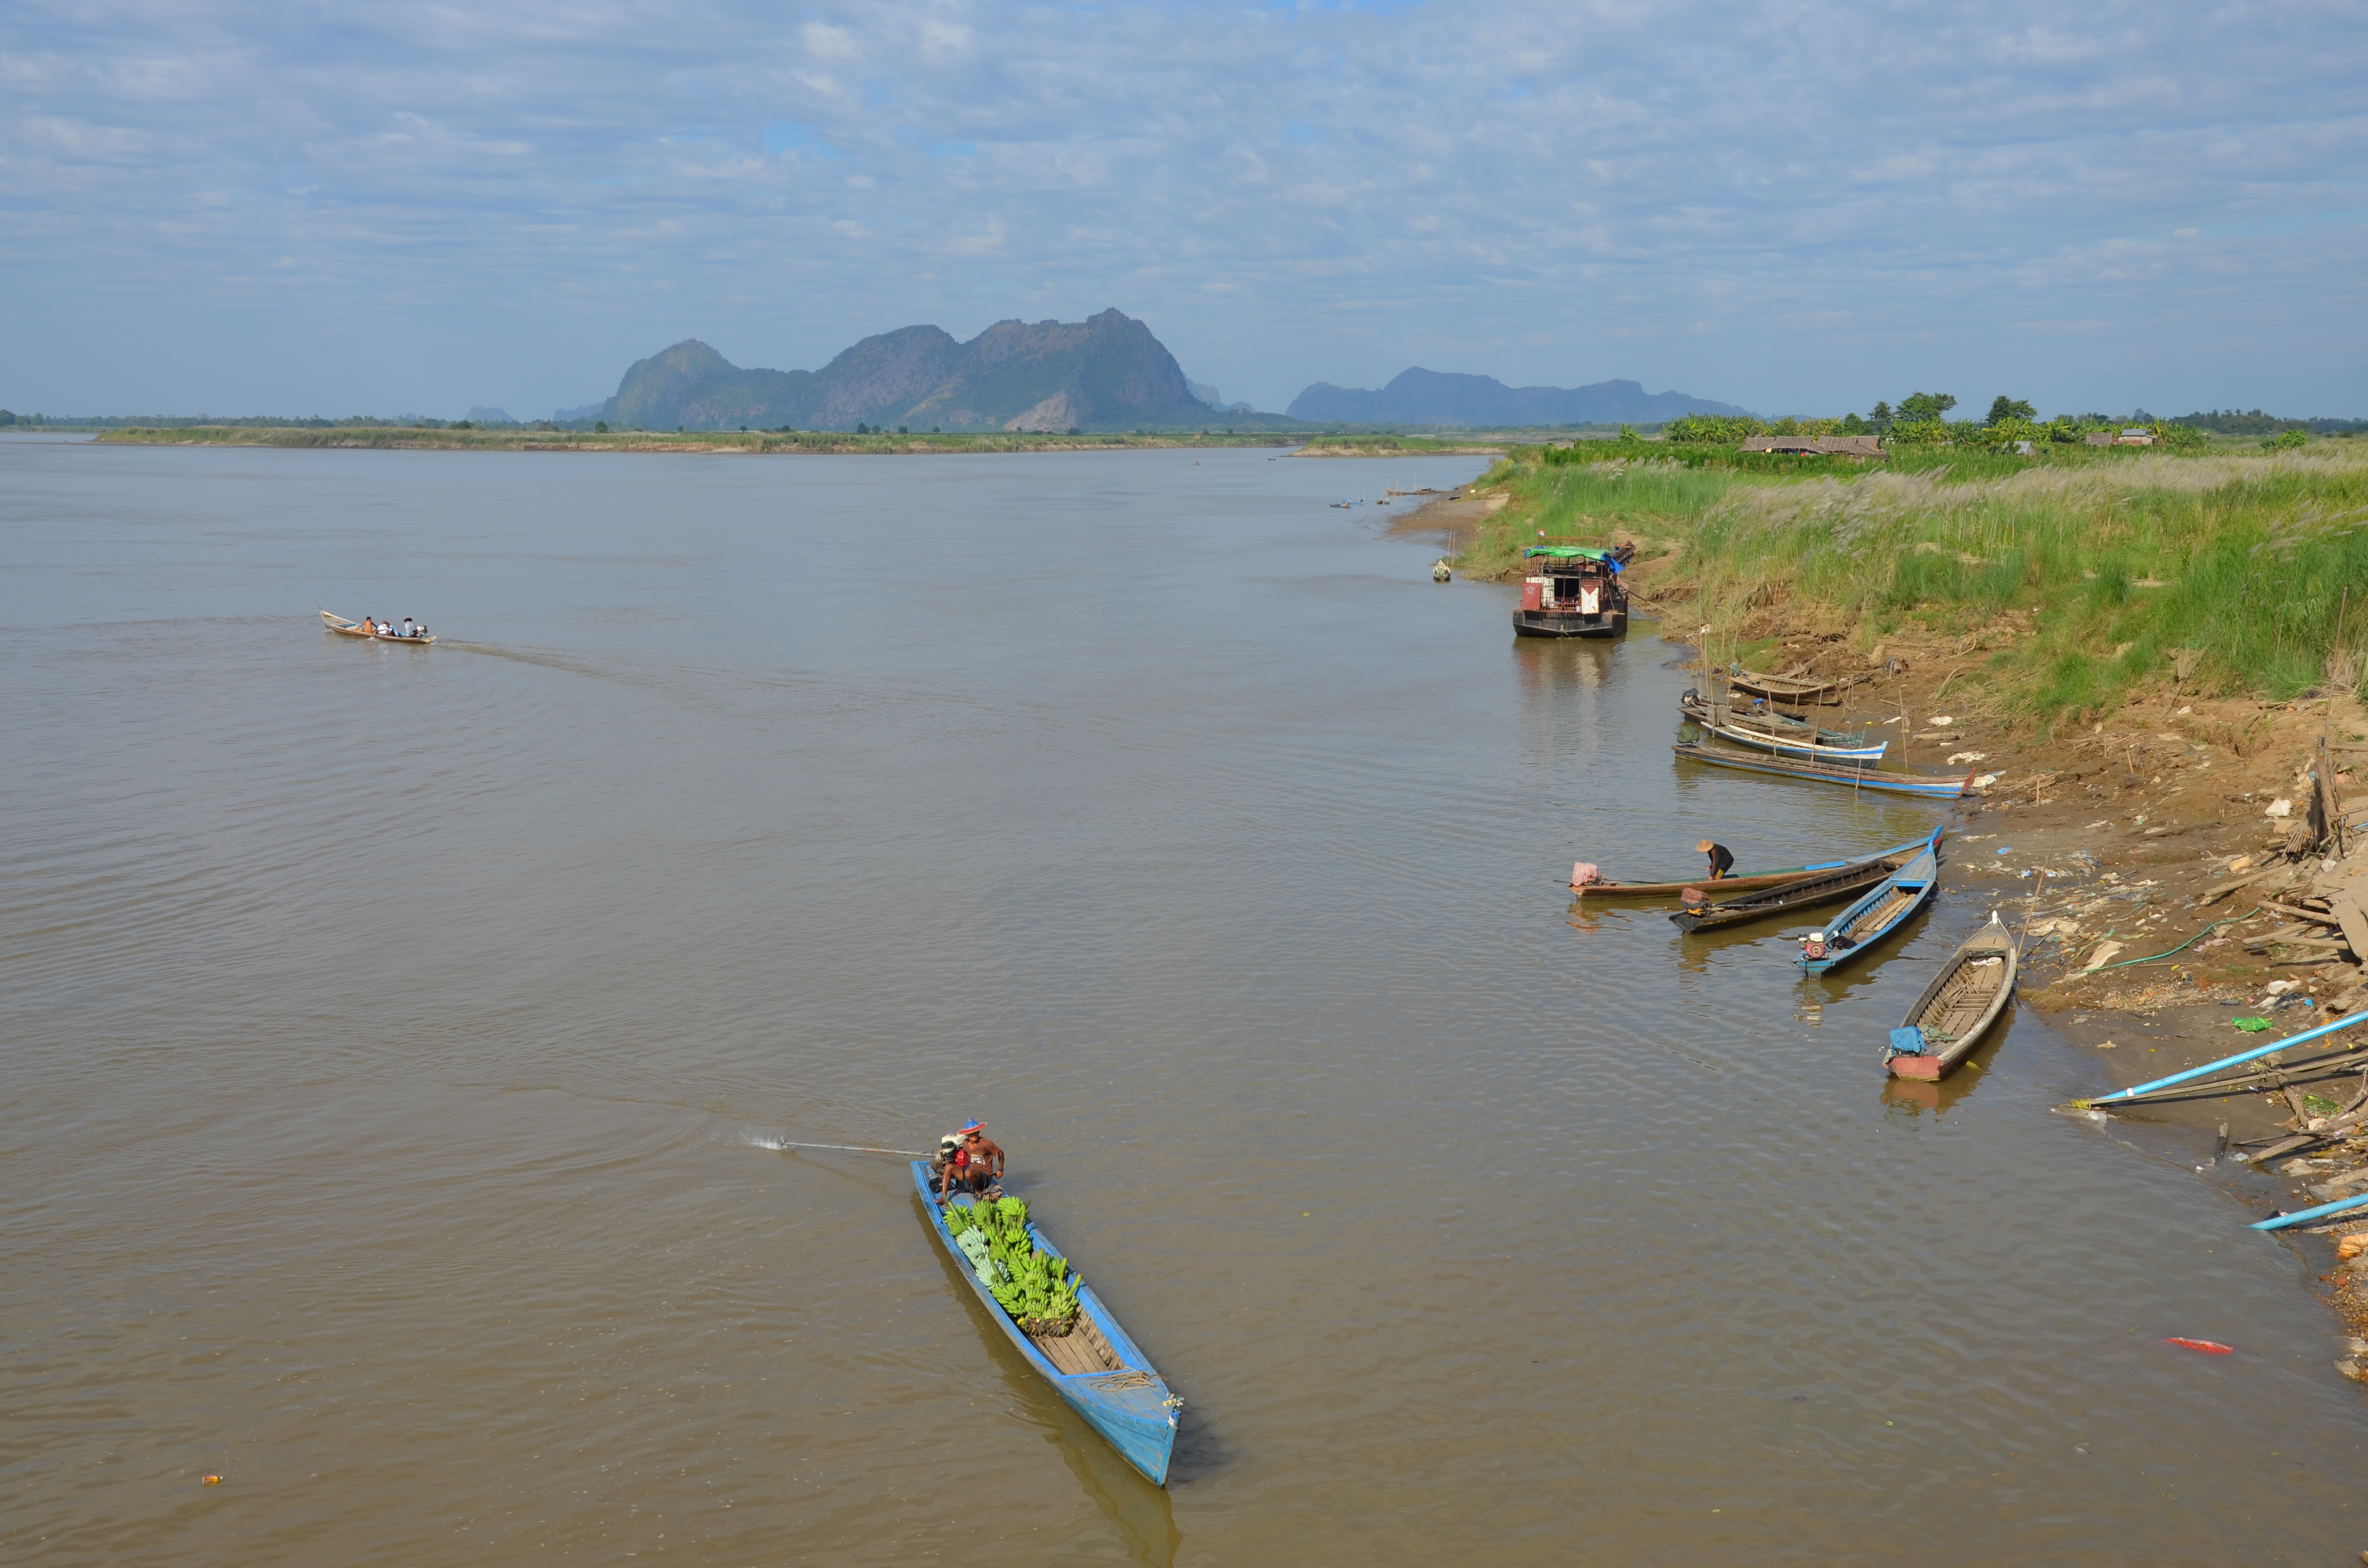 04 - Hpa An